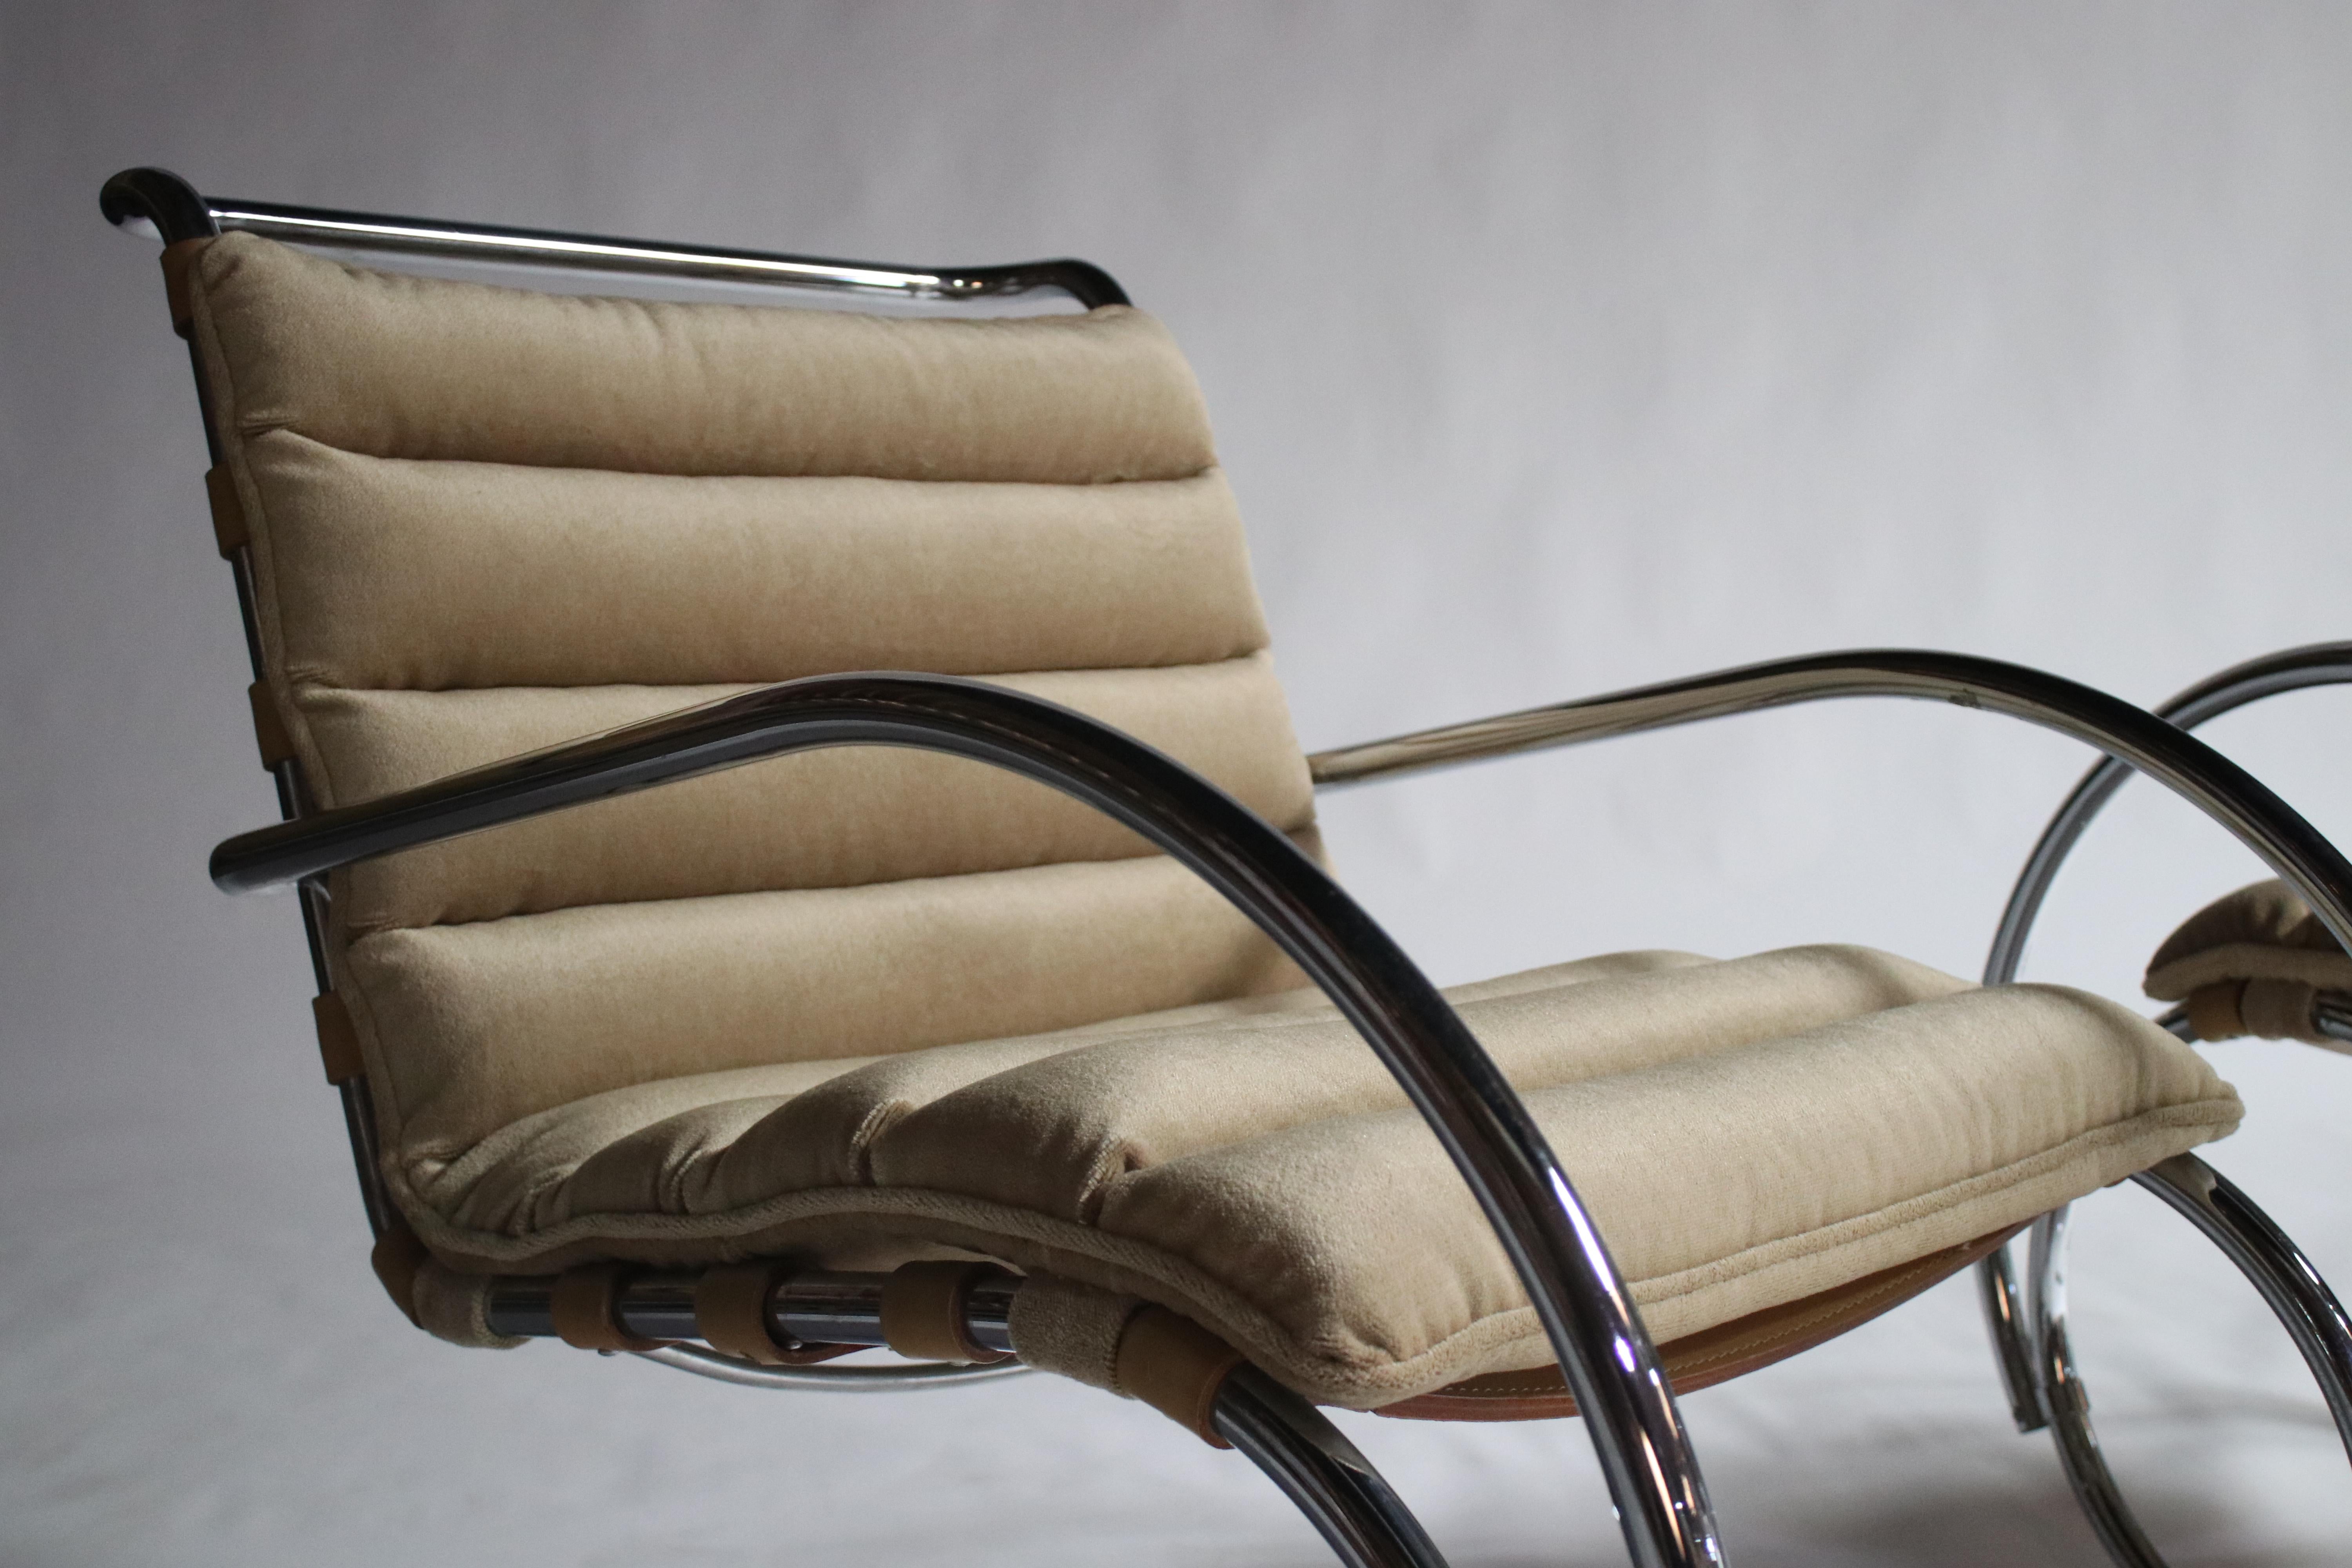 Polished Pair of MR Lounge Armchairs by Mies van der Rohe